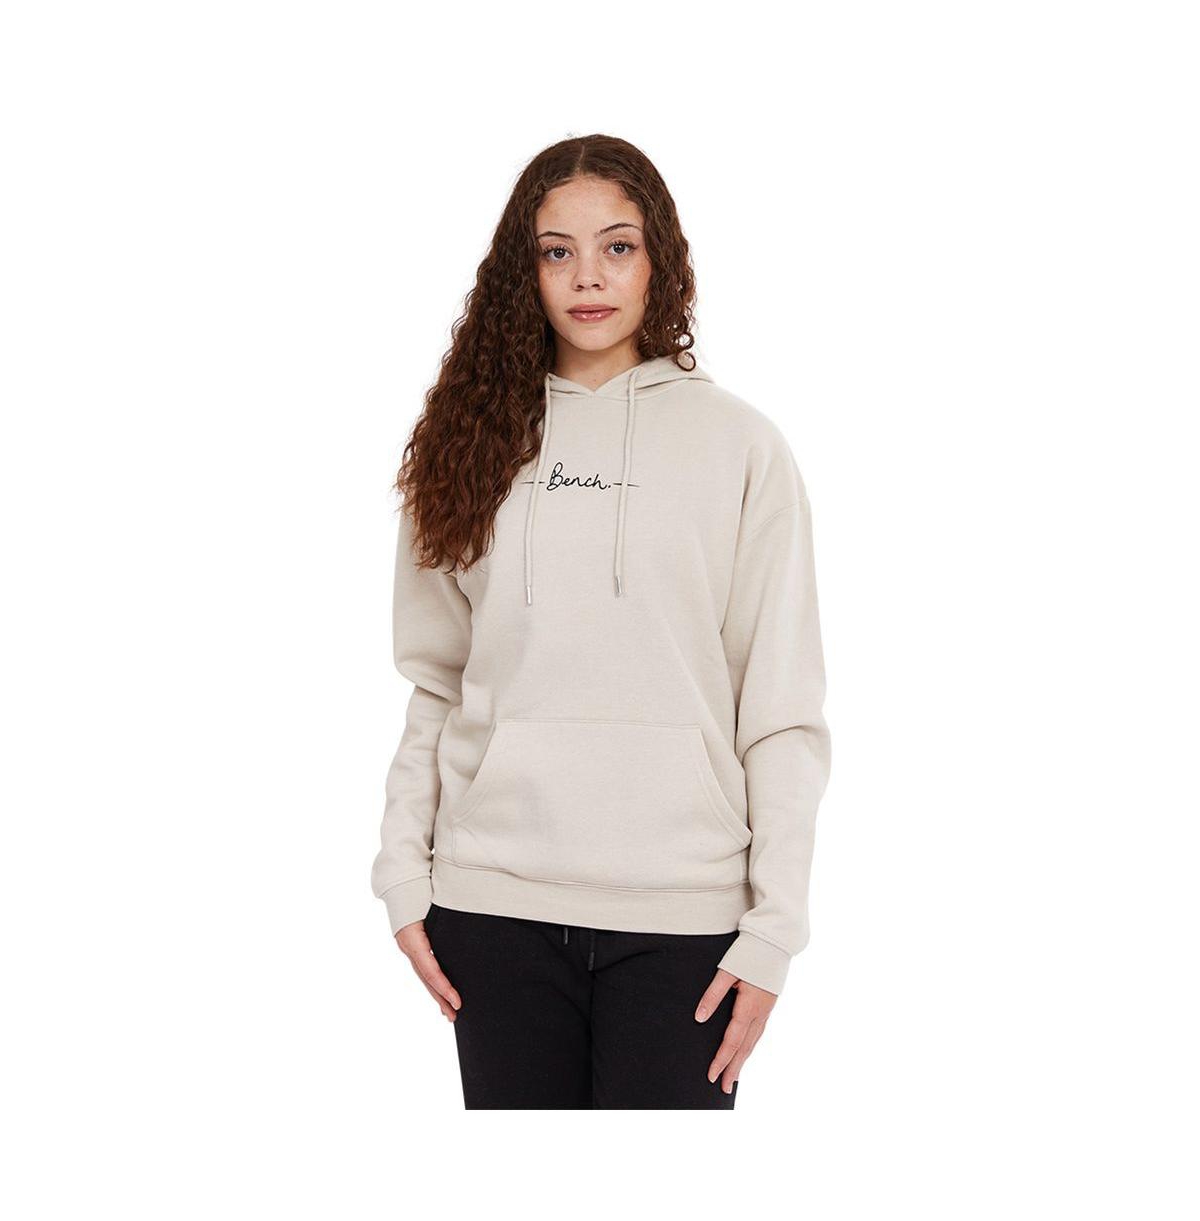  Bench Laya womens hoodie stone with small script logo at chest